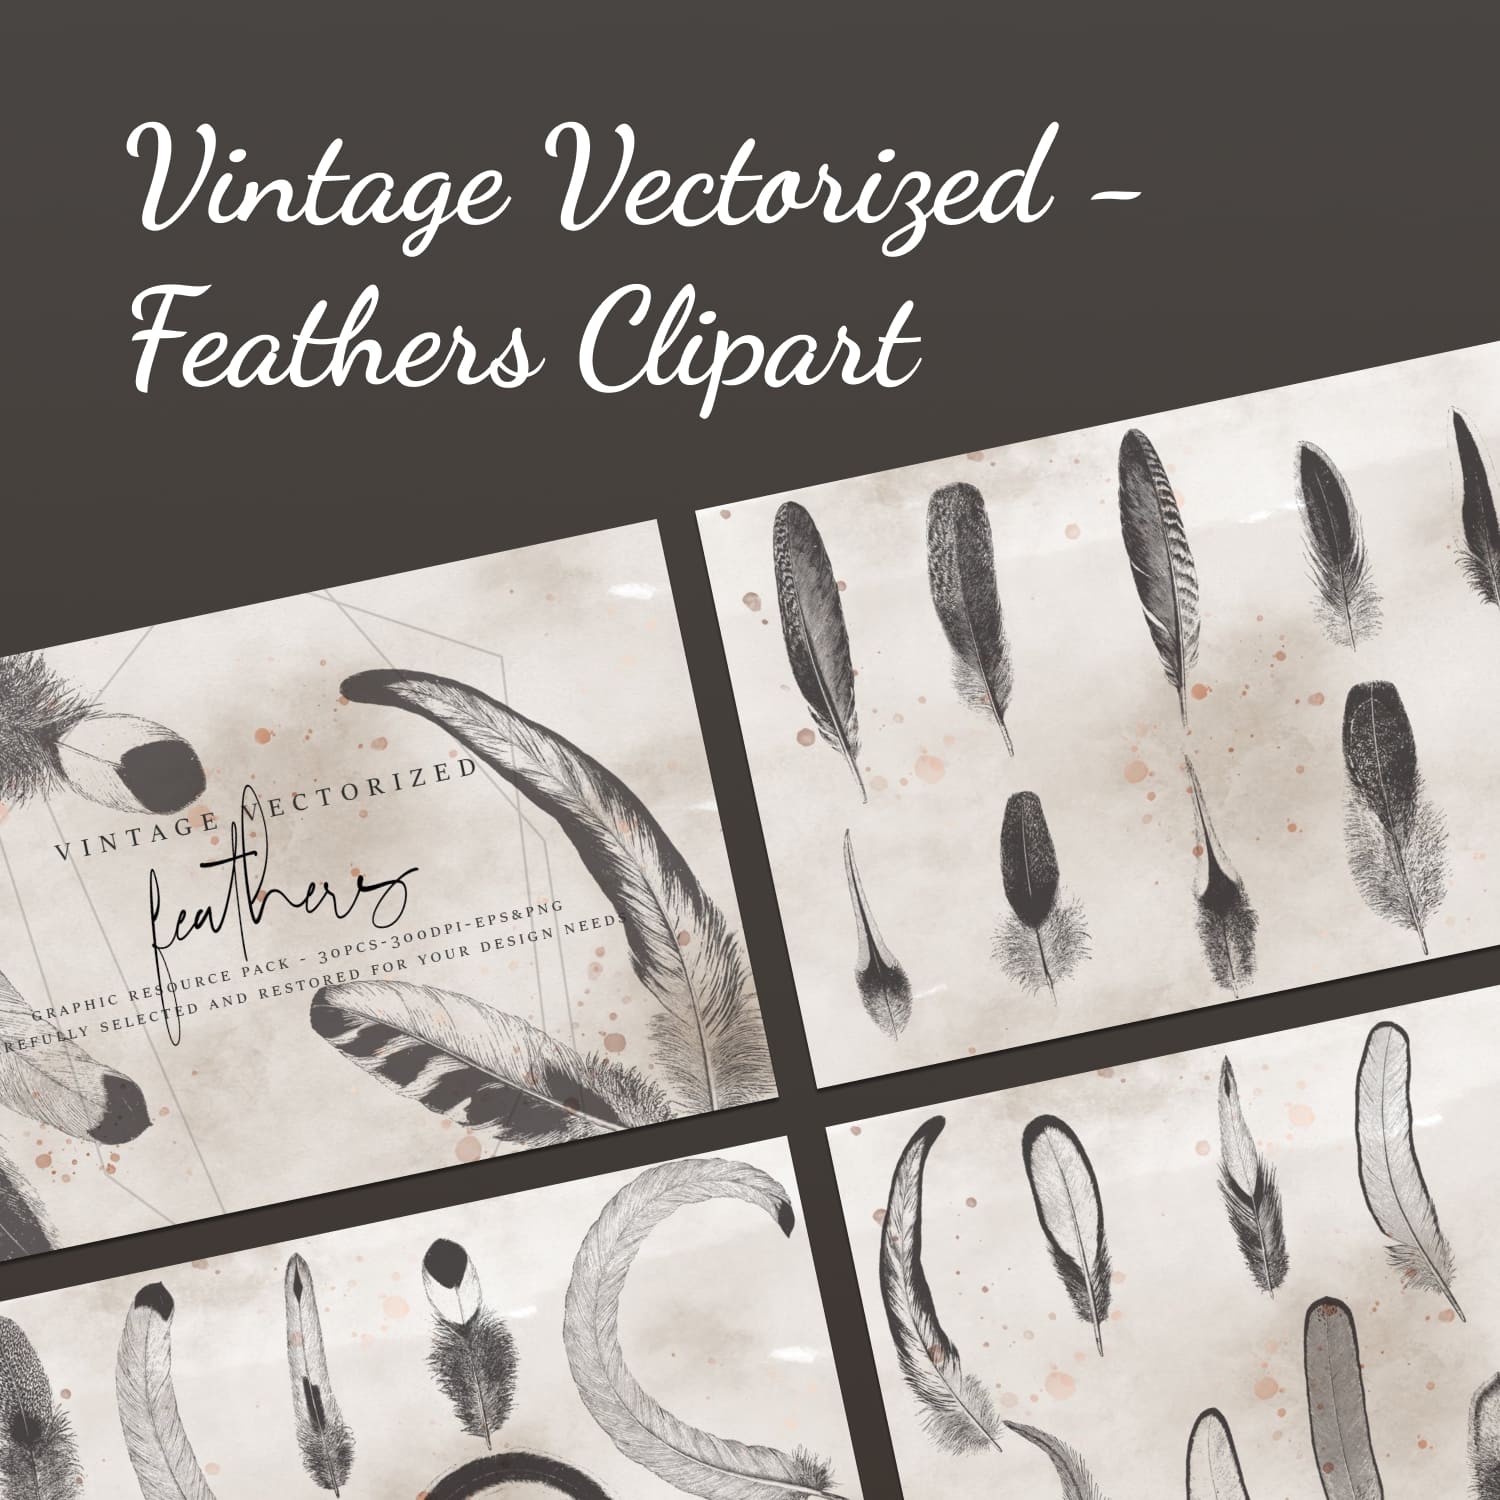 Vintage Vectorized - Feathers Clipart cover image.